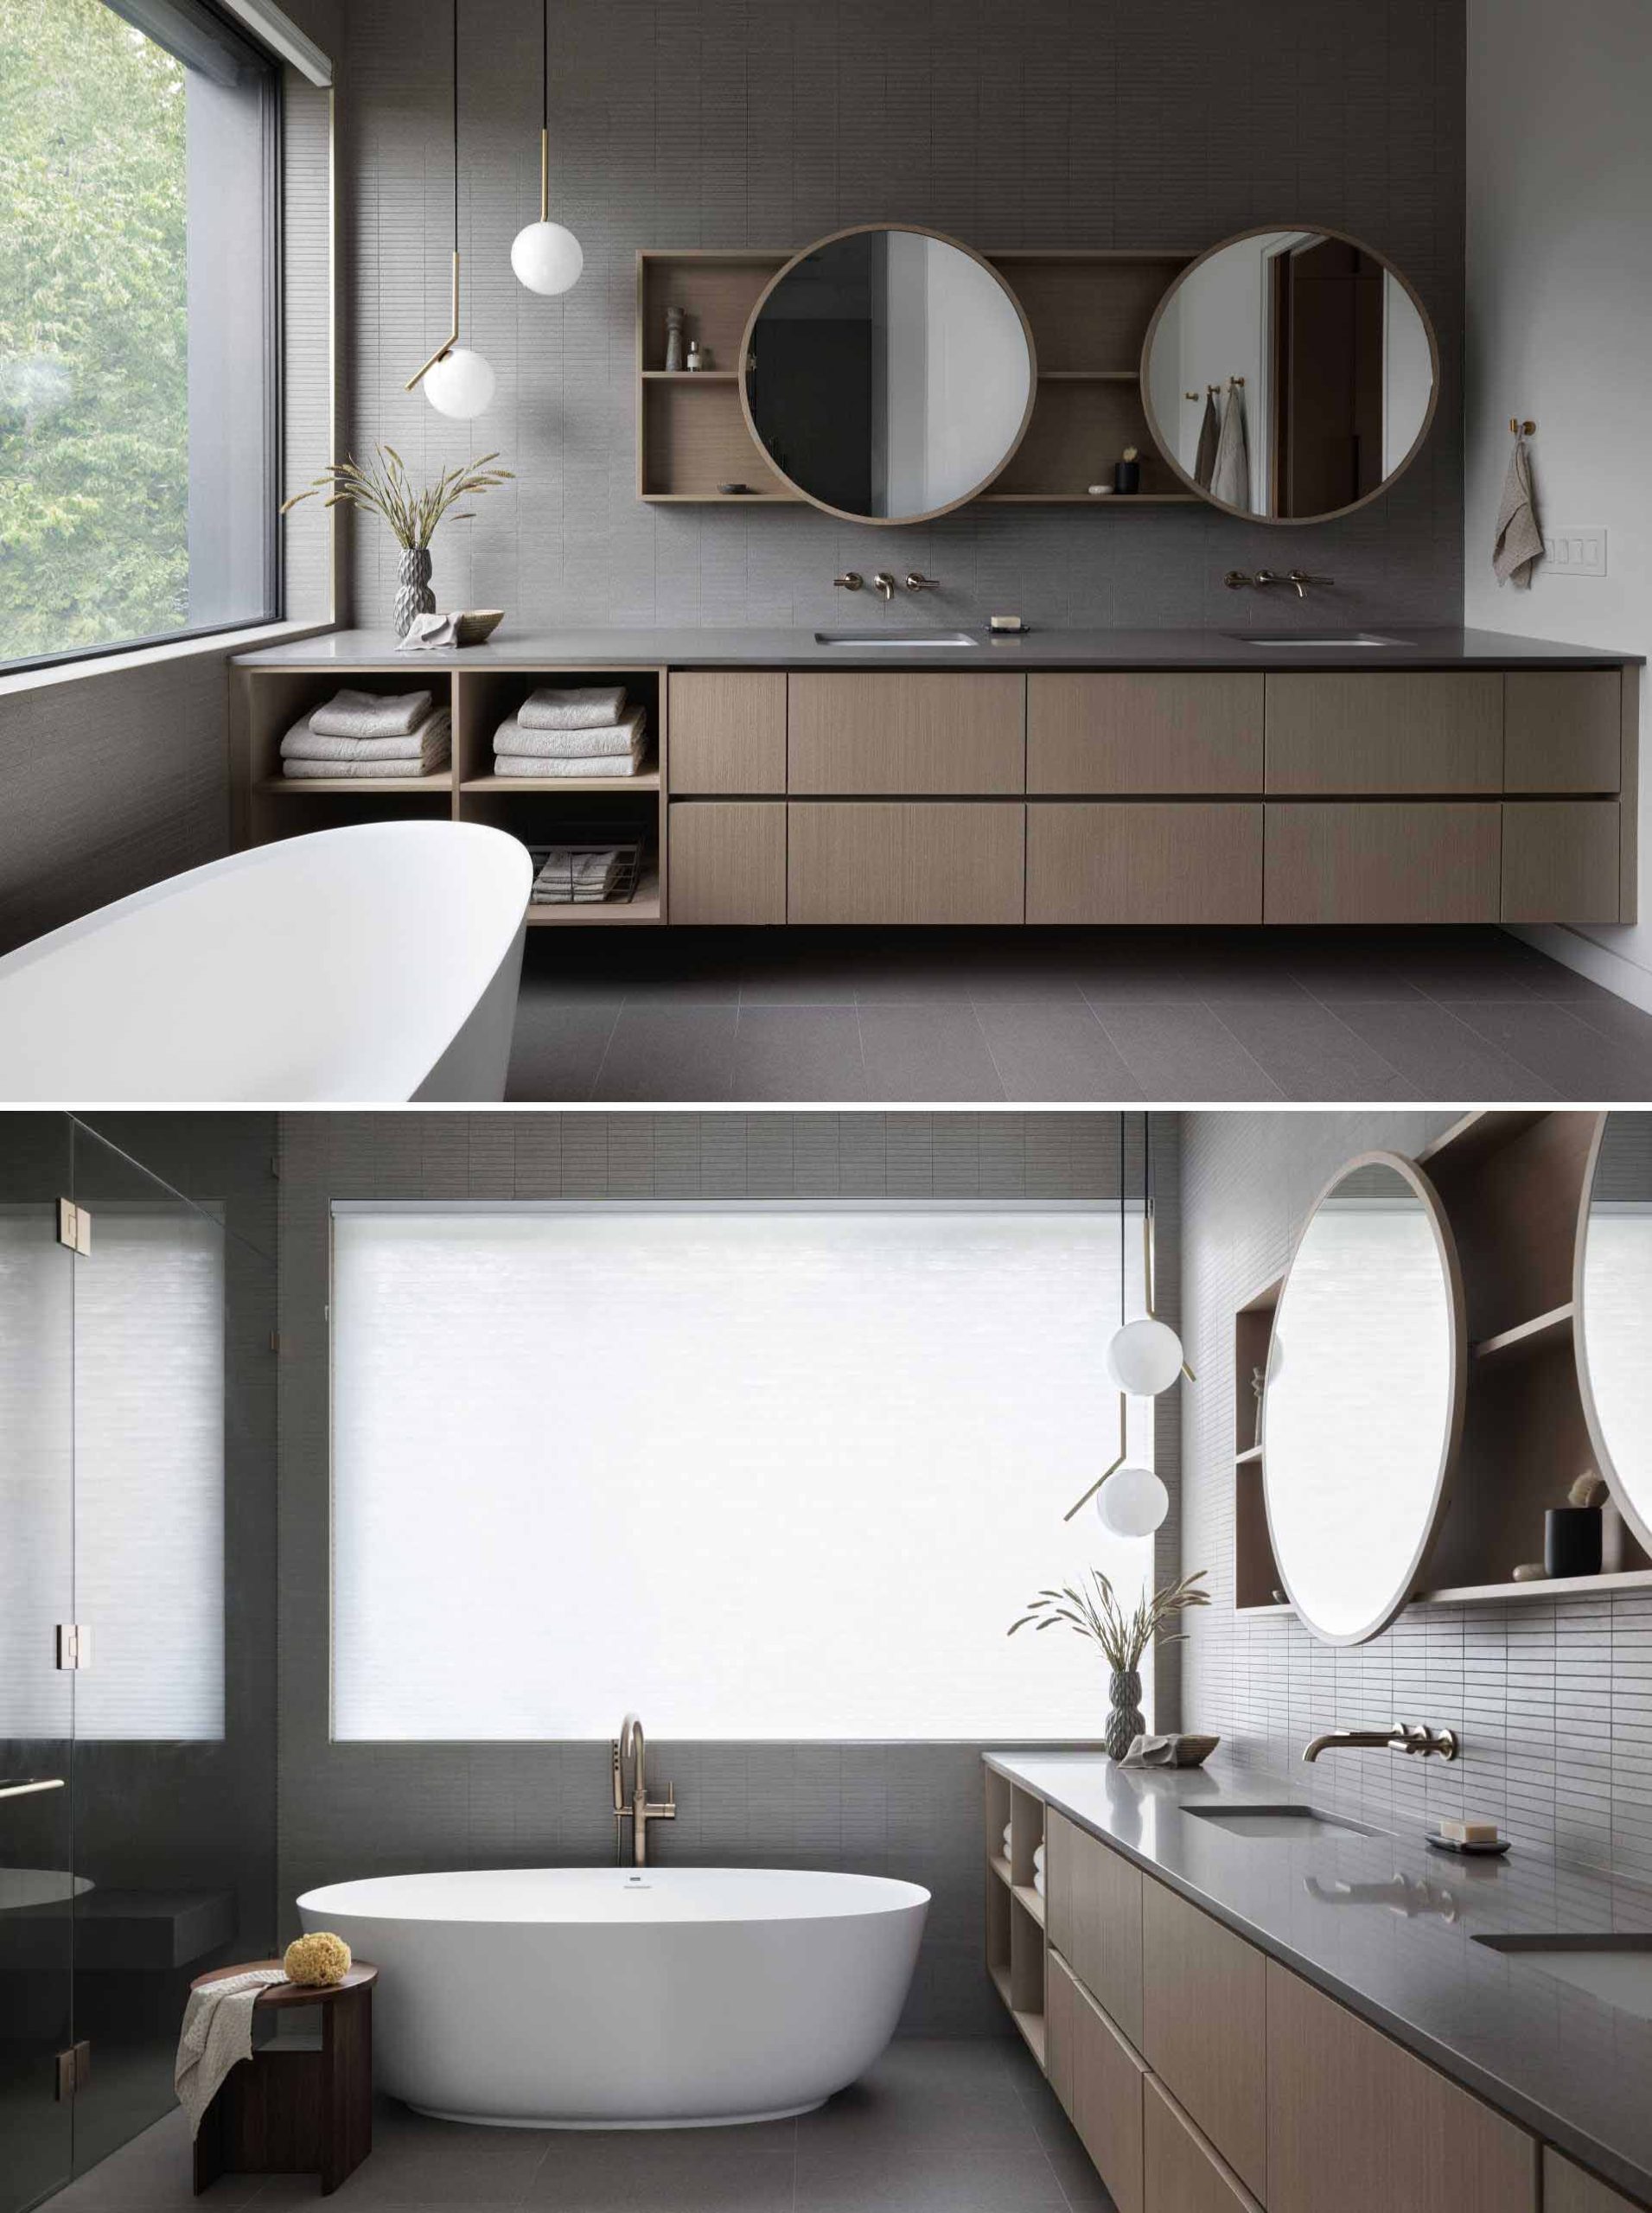 A modern bathroom with grey tiles, a wood vanity, round mirrors, freestanding bathtub, and glass-enclosed shower.